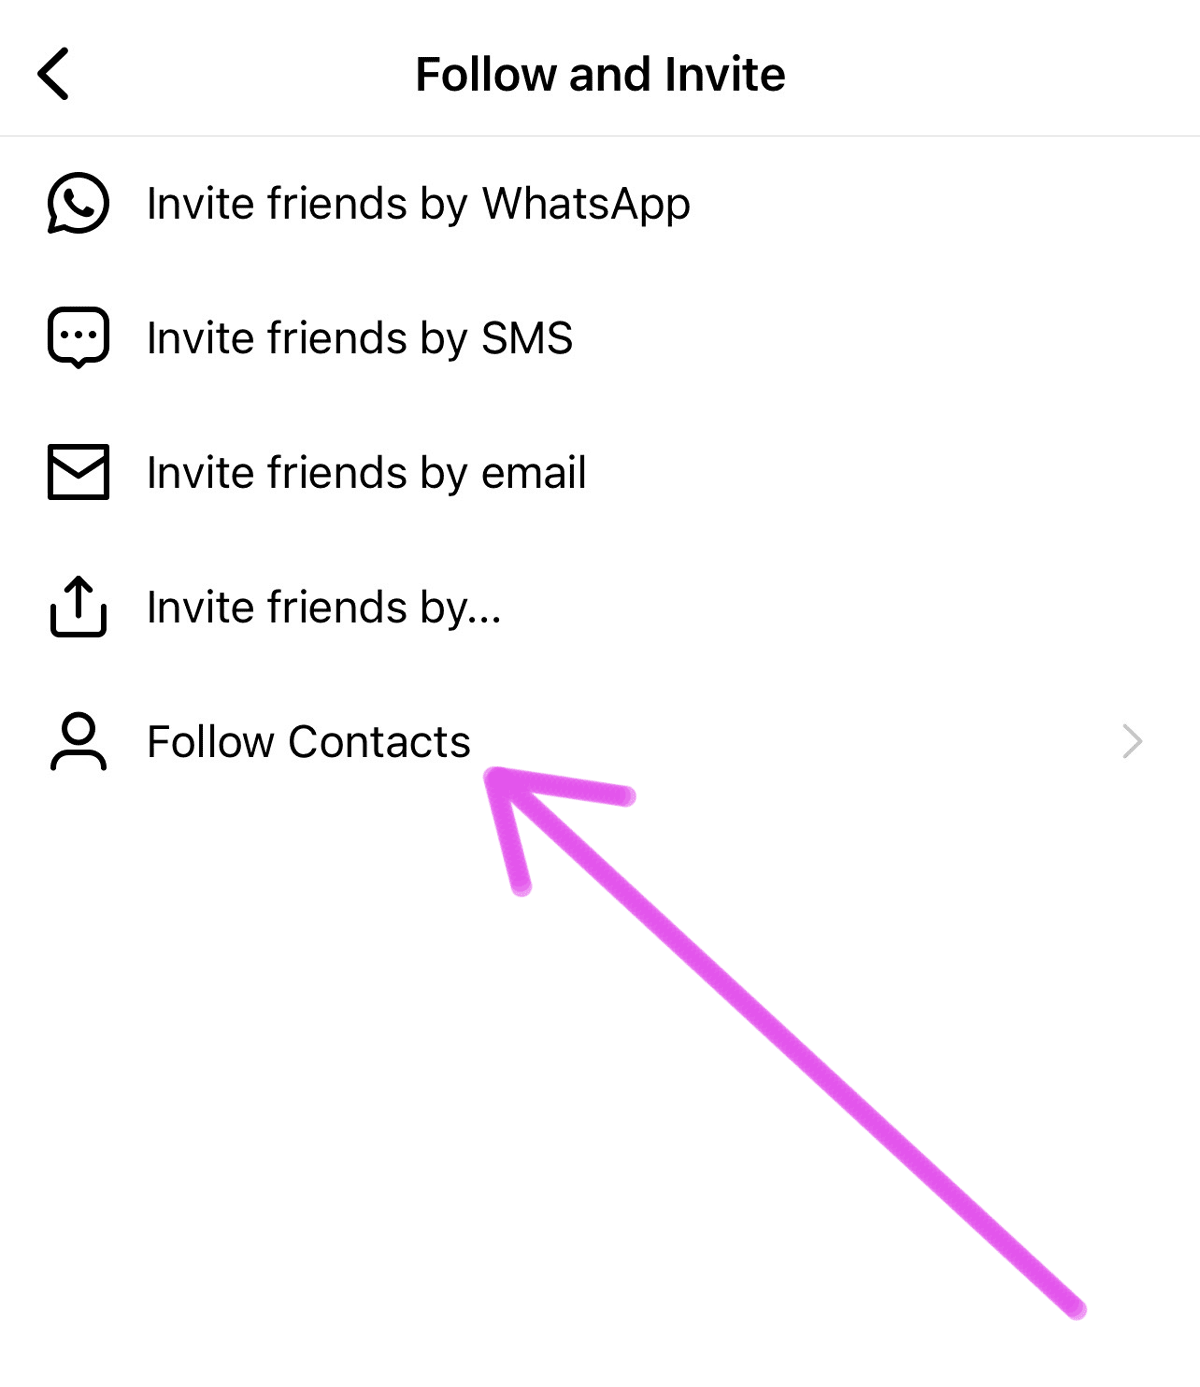 choose Follow Contacts under follow and invite on IG.